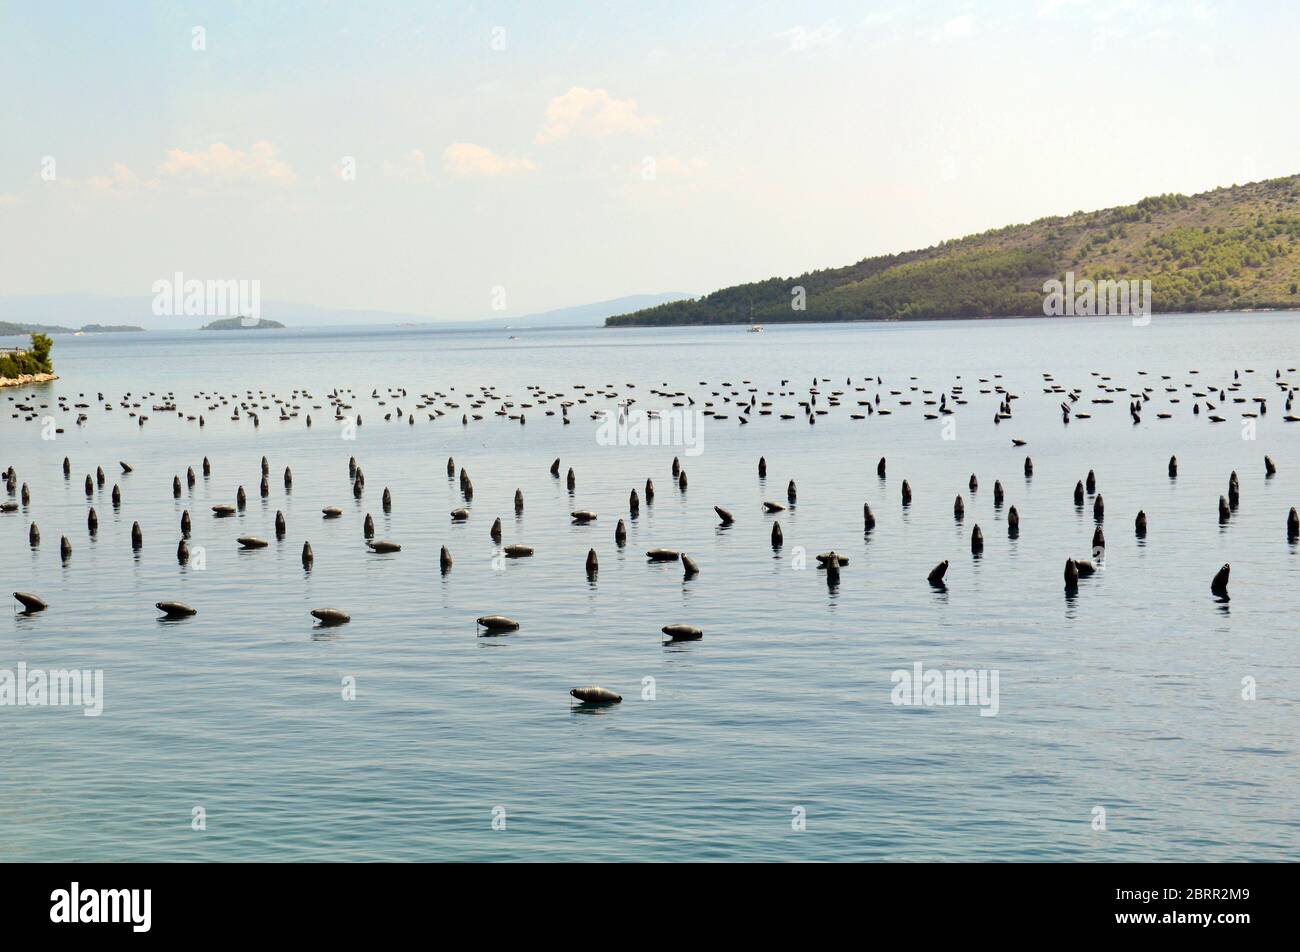 Oysters and Mussels farming in Croatia. Stock Photo